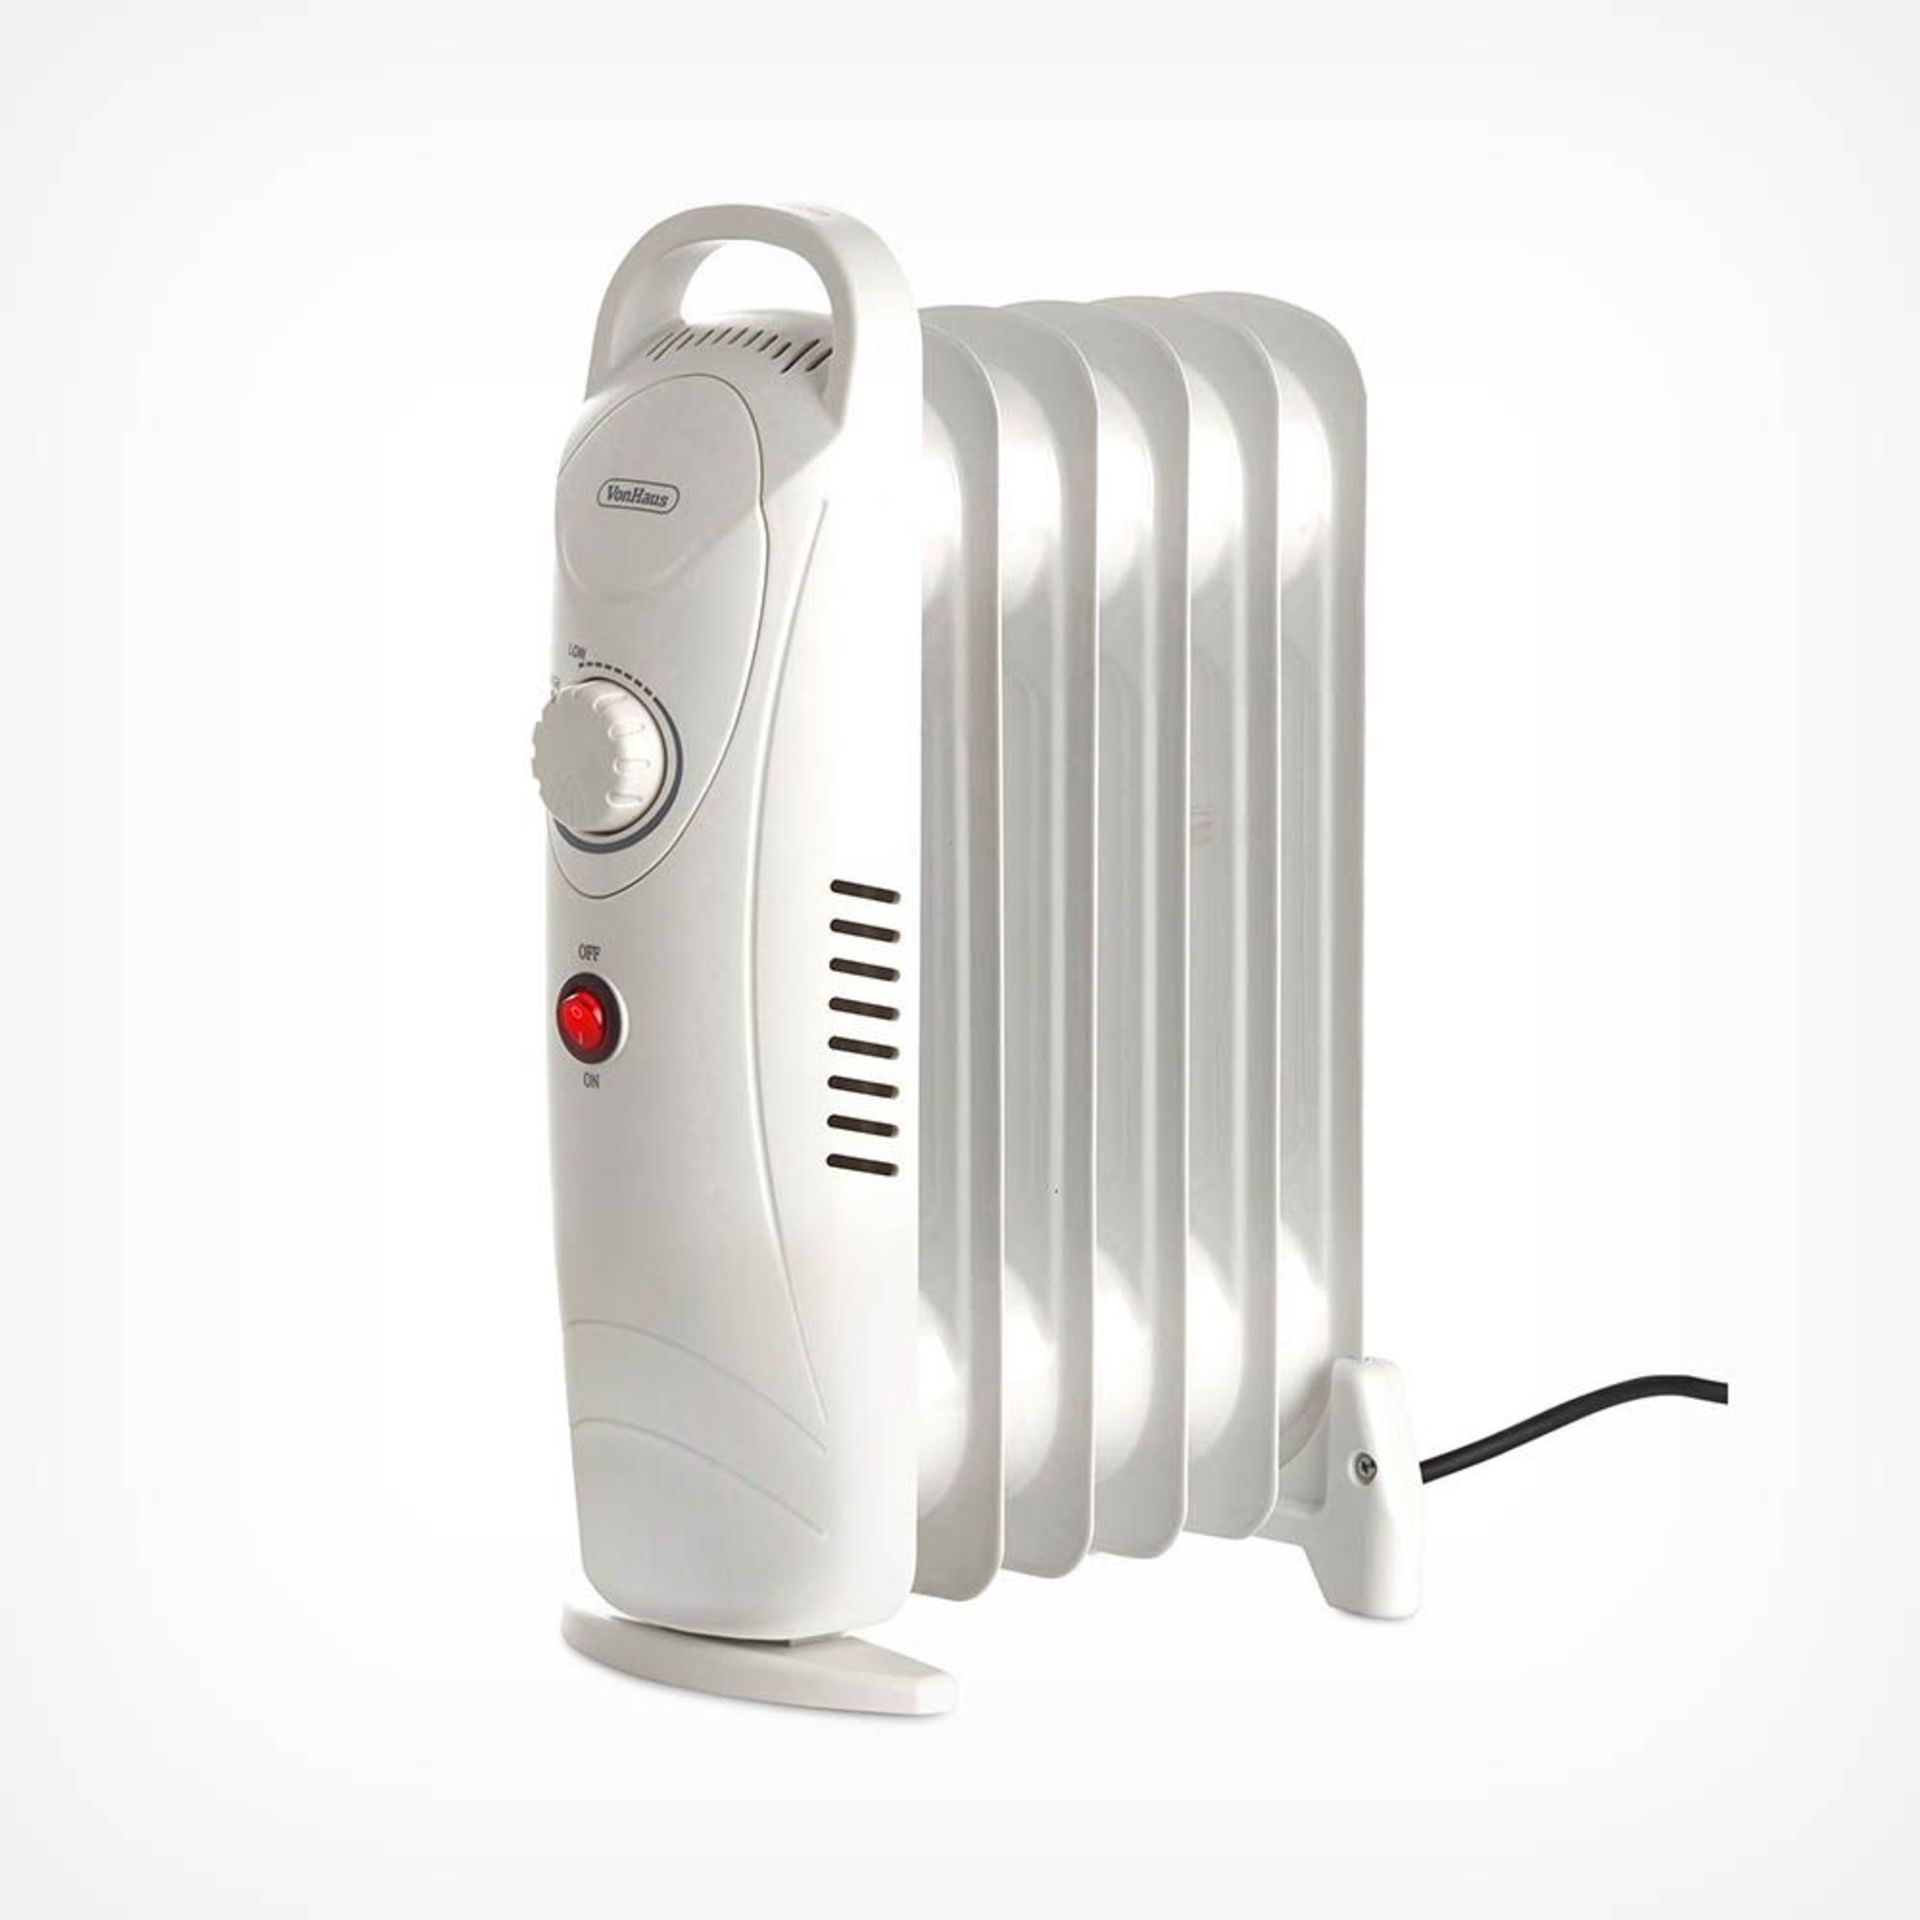 (SU1063) 6 Fin 800W Oil Filled Radiator - White Compact yet powerful 800W radiator with 6 oil-...